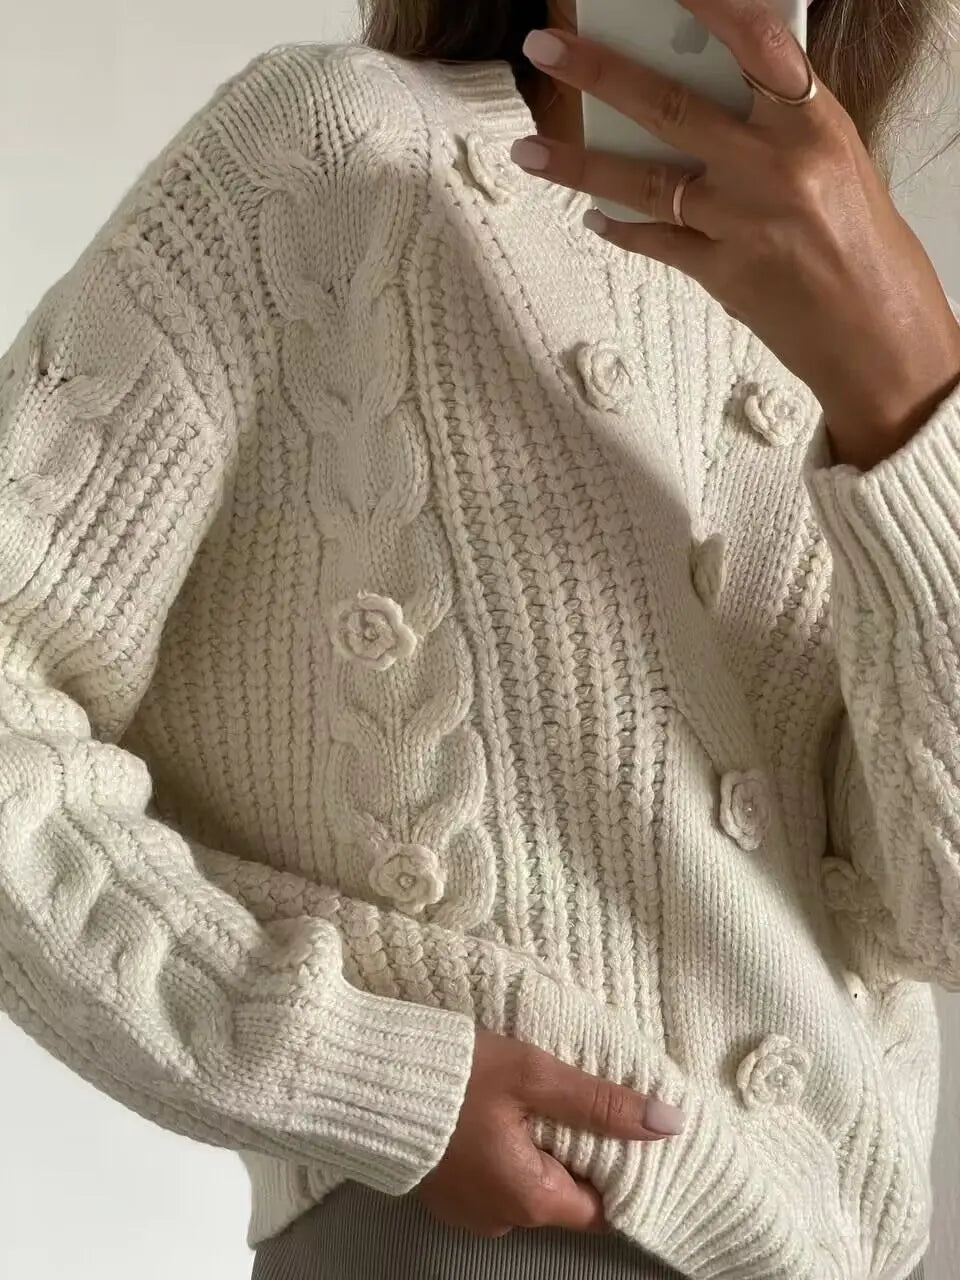 Women Fashion With Pearl Flower Appliques Loose Knit Sweater Vintage O Neck Long Sleeve Female Pullovers Chic Tops C-163